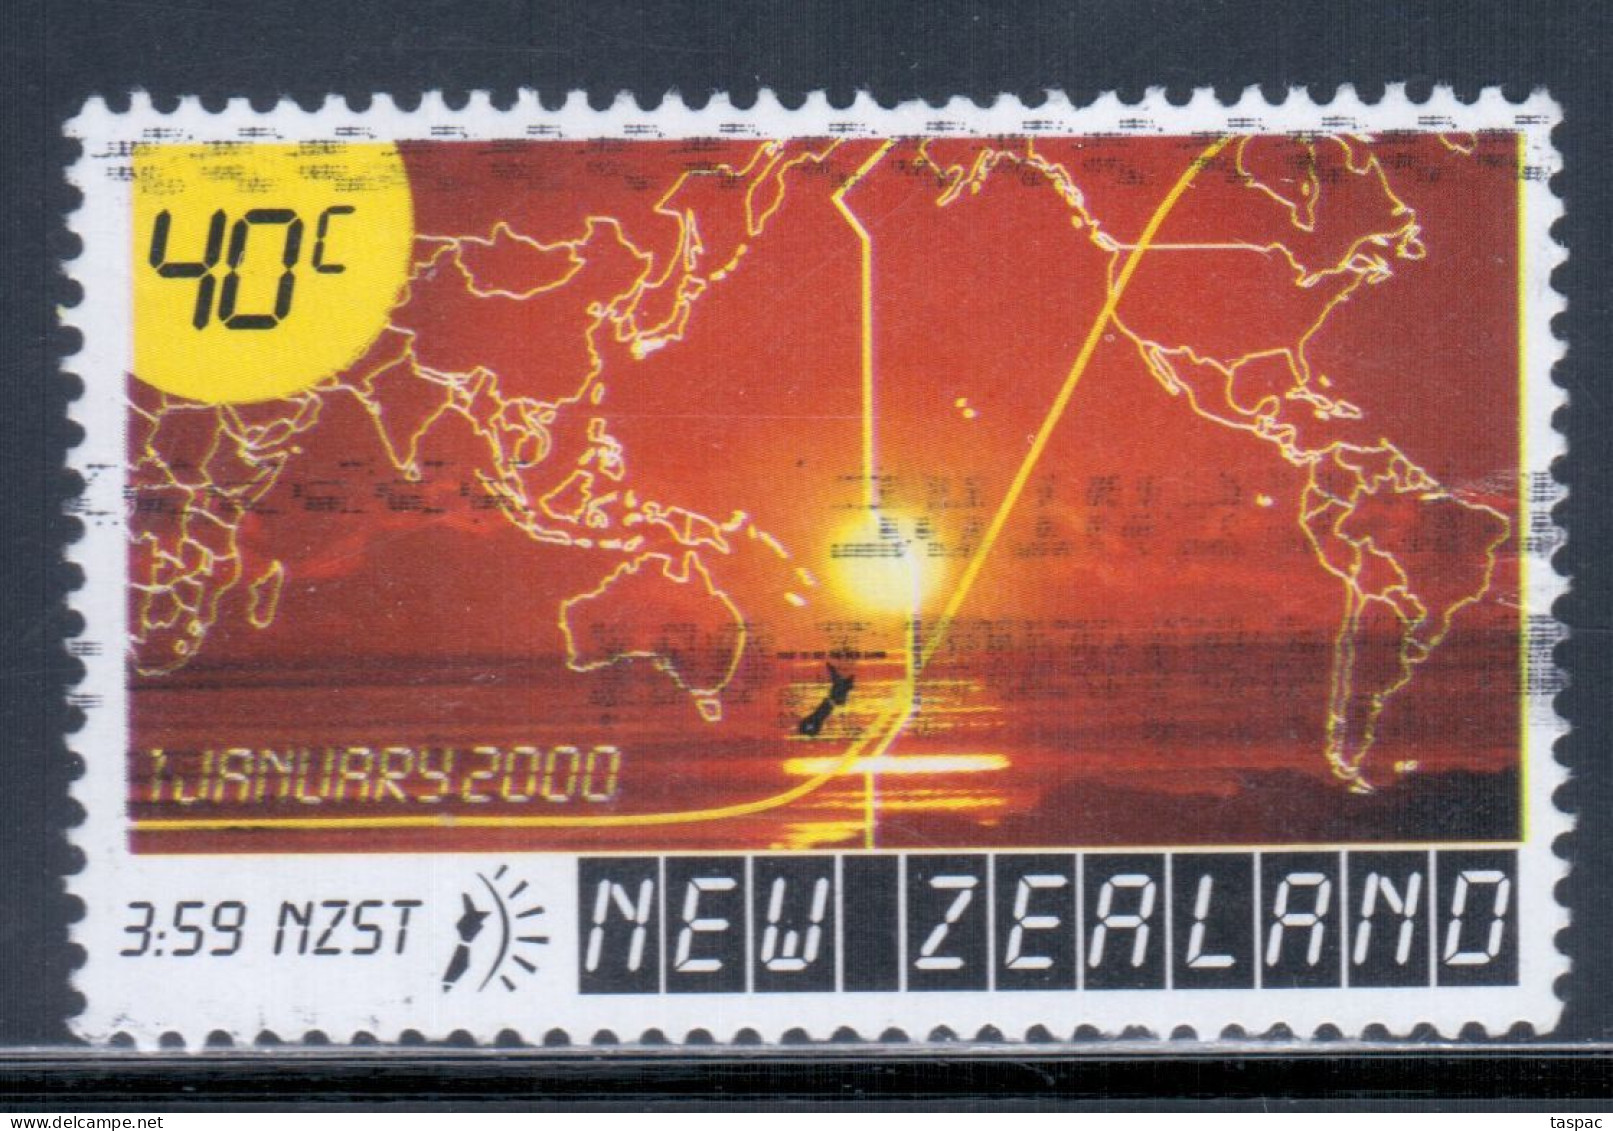 New Zealand 2000 Mi# 1813 Used - First Sunrise Of The New Millennium / Space - Oceanië